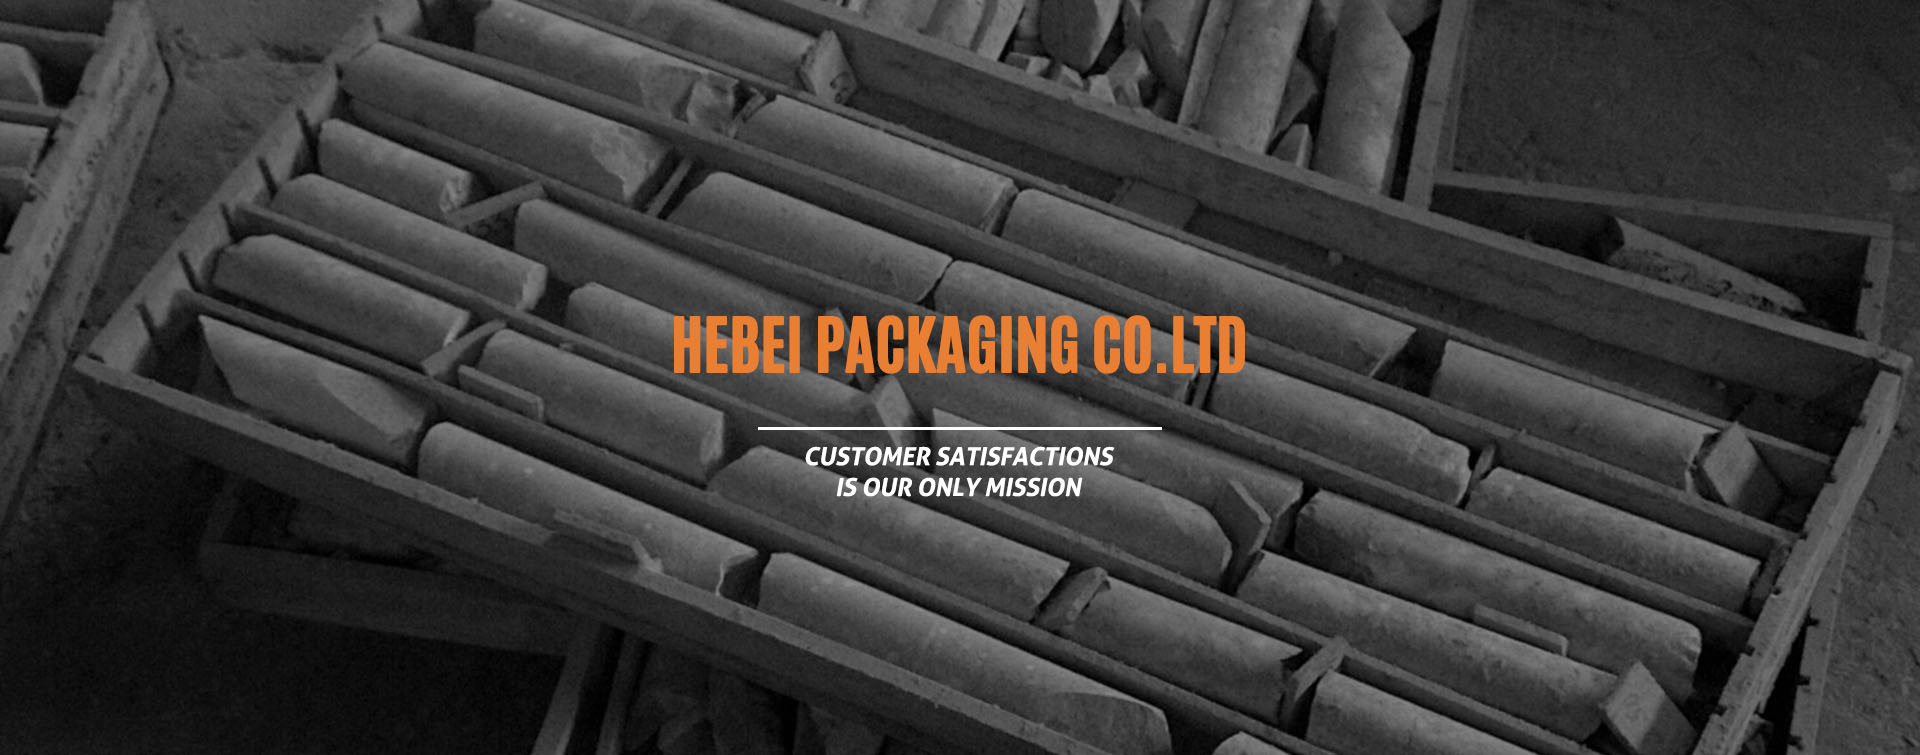 Compound packaging products  industry famous enterprises